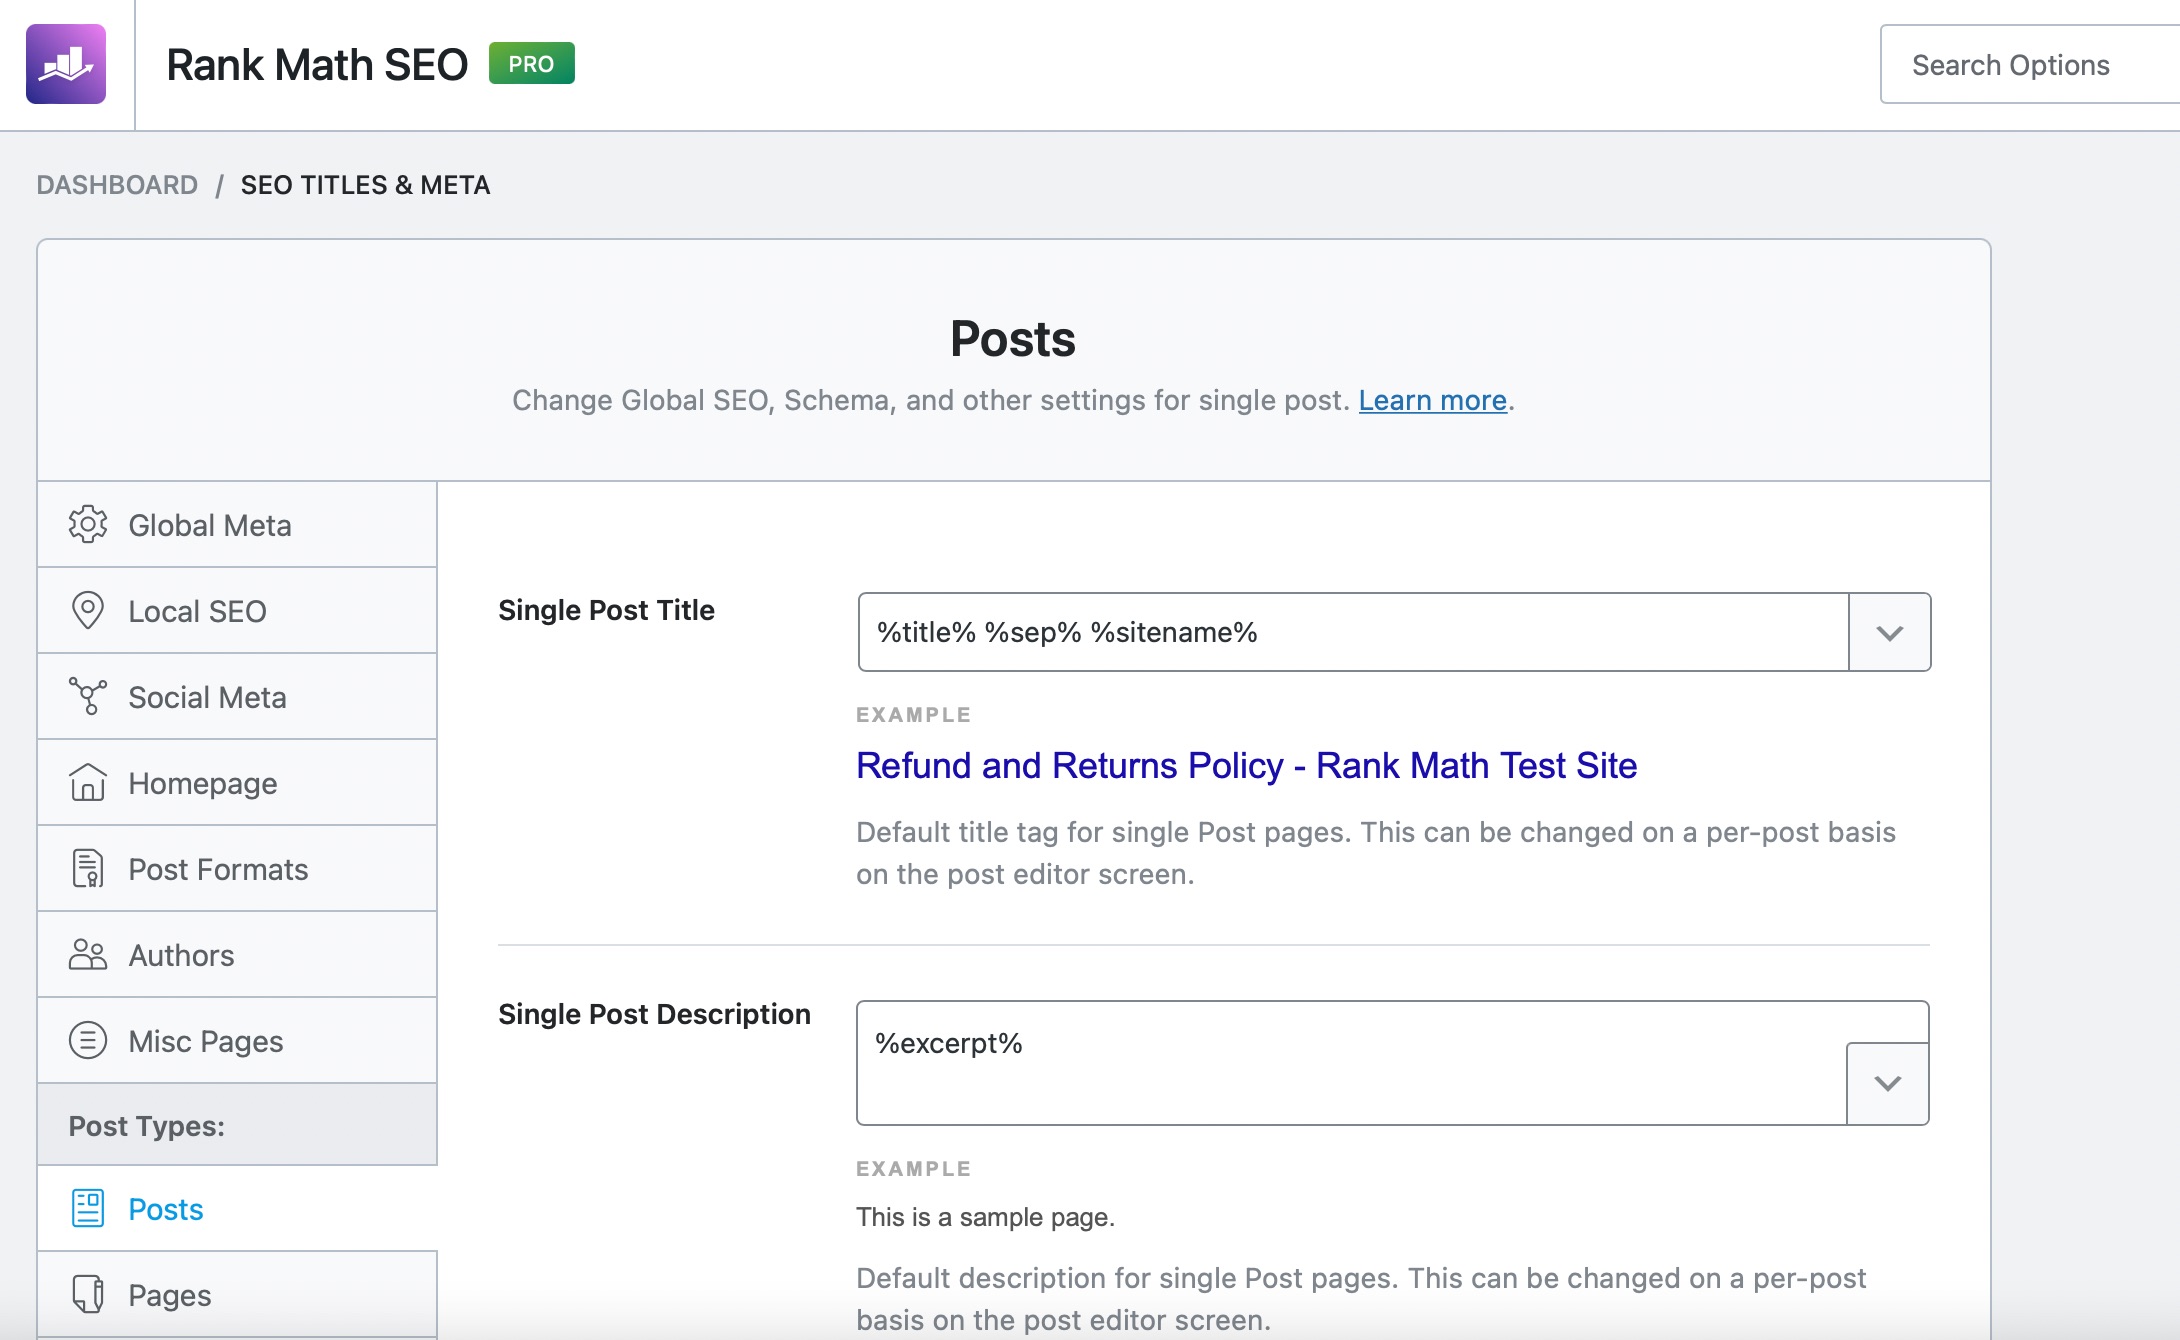 SEO settings for Posts